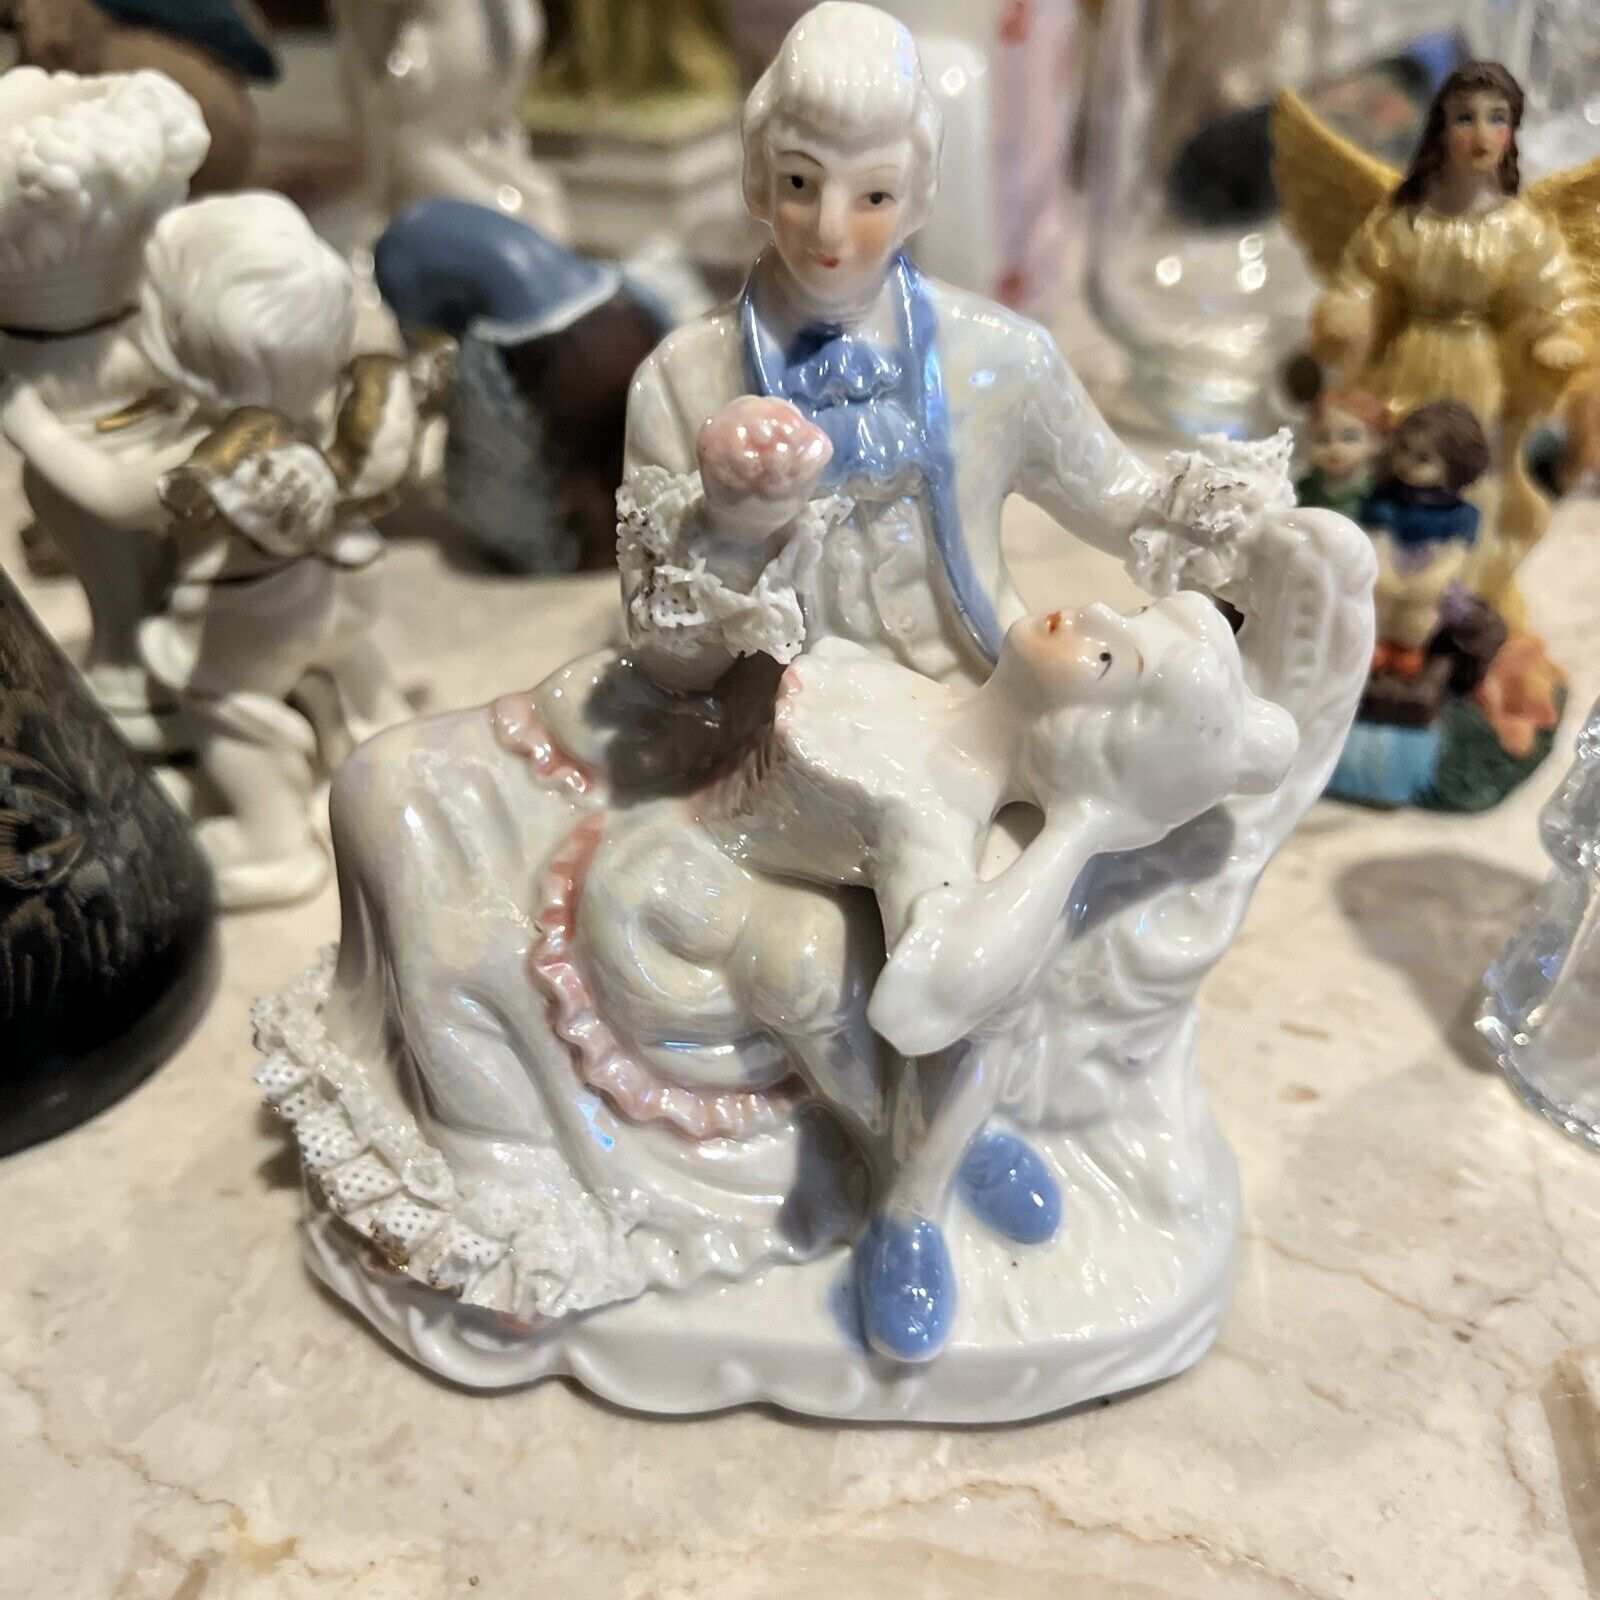 Vintage Porcelain Figurine Blue And White, Victorian Man And Women 5” Tall Luste